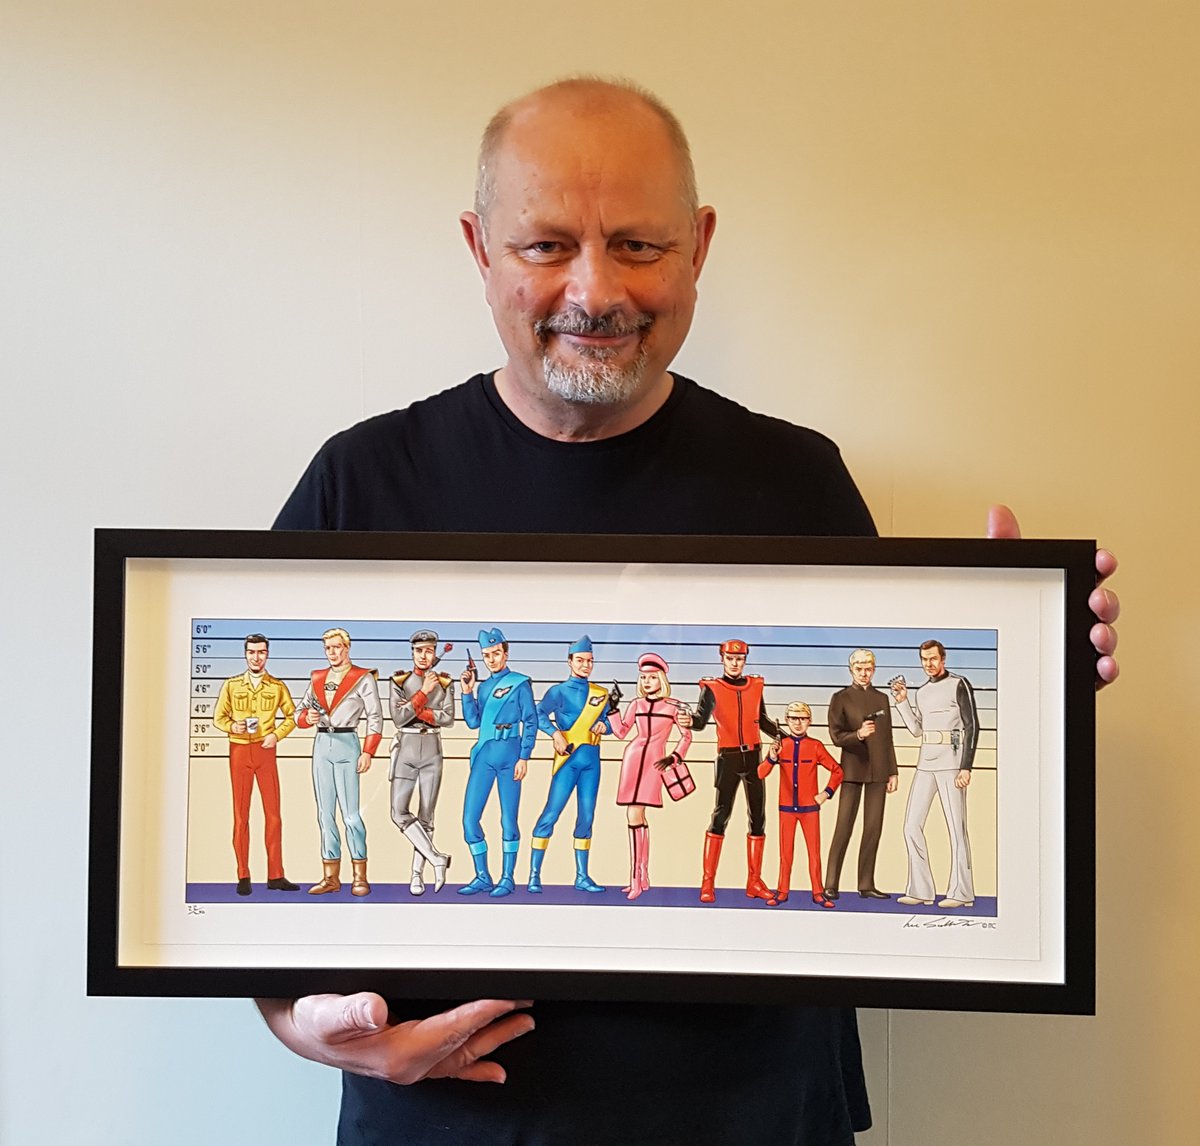 MUGSHOTS! Here's @LeeSullivanArt with his amazing goodies and baddies Usual Suspects prints. Limited editions, available exclusively from the Gerry Anderson Store: andr.sn/UsualSuspects